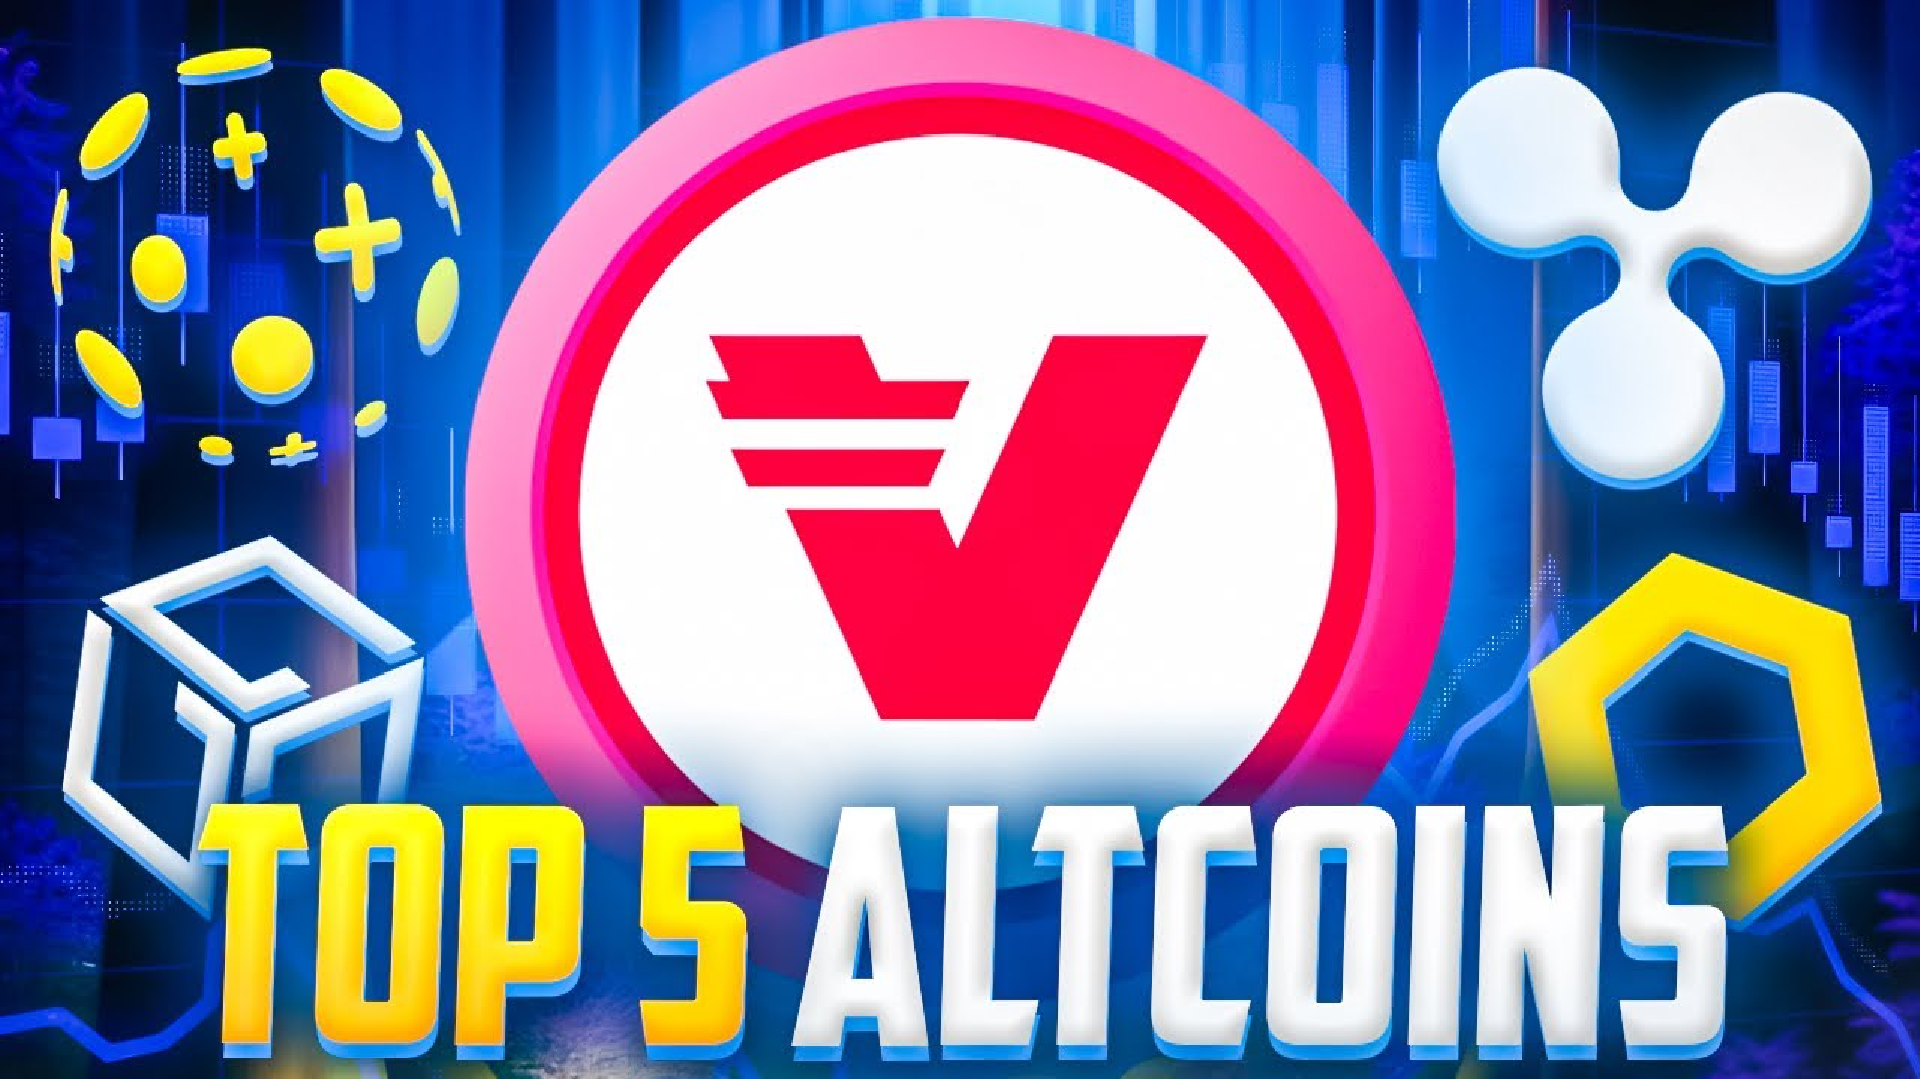 5 Best Altcoins to Invest in 2023 Cryptonews Top Picks for October